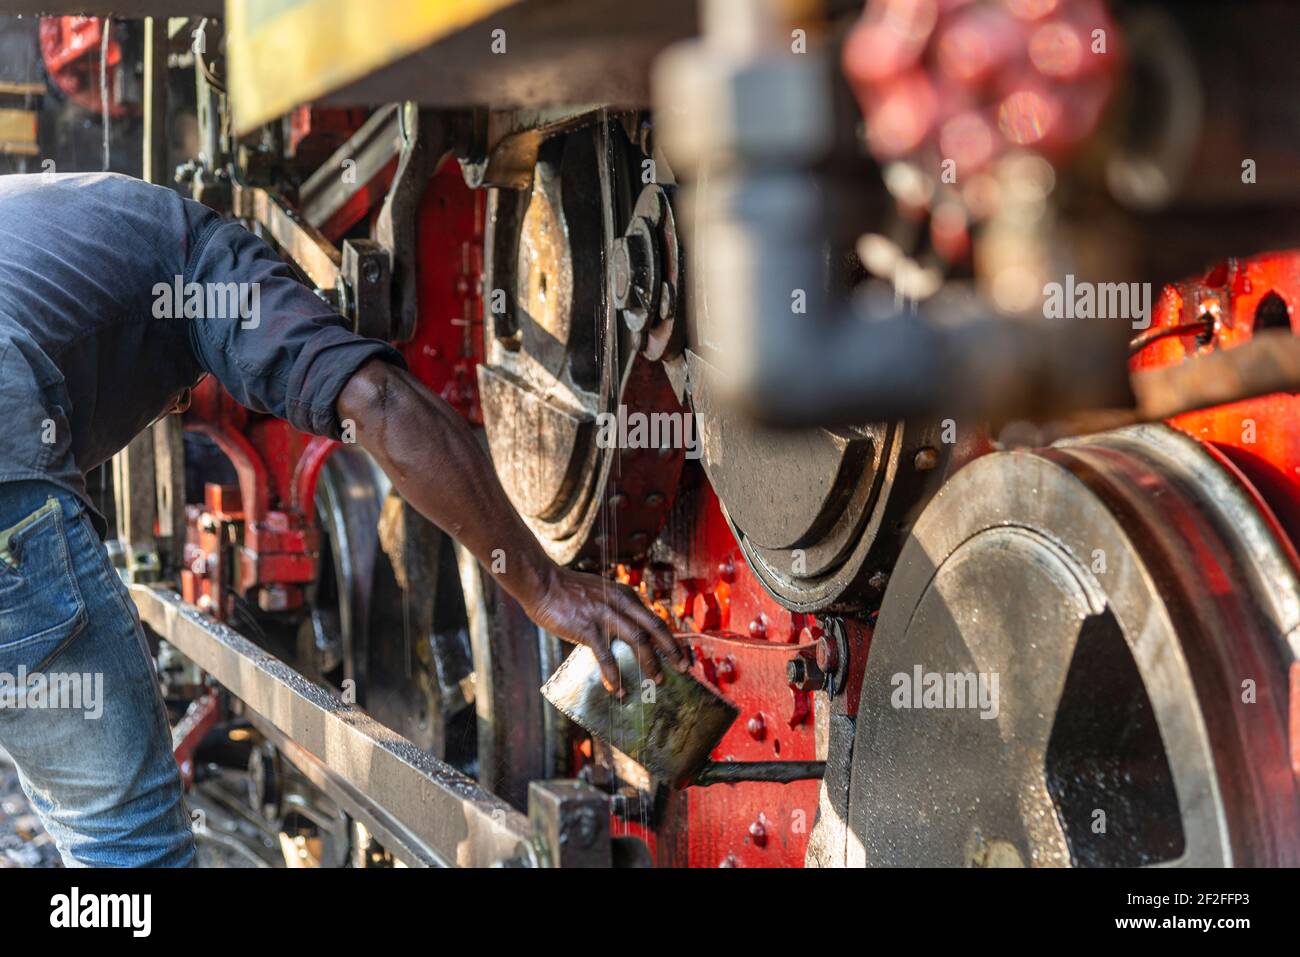 Lure operator oils the wheels of the toy train's locomotive, Tamil Nadu, India Stock Photo